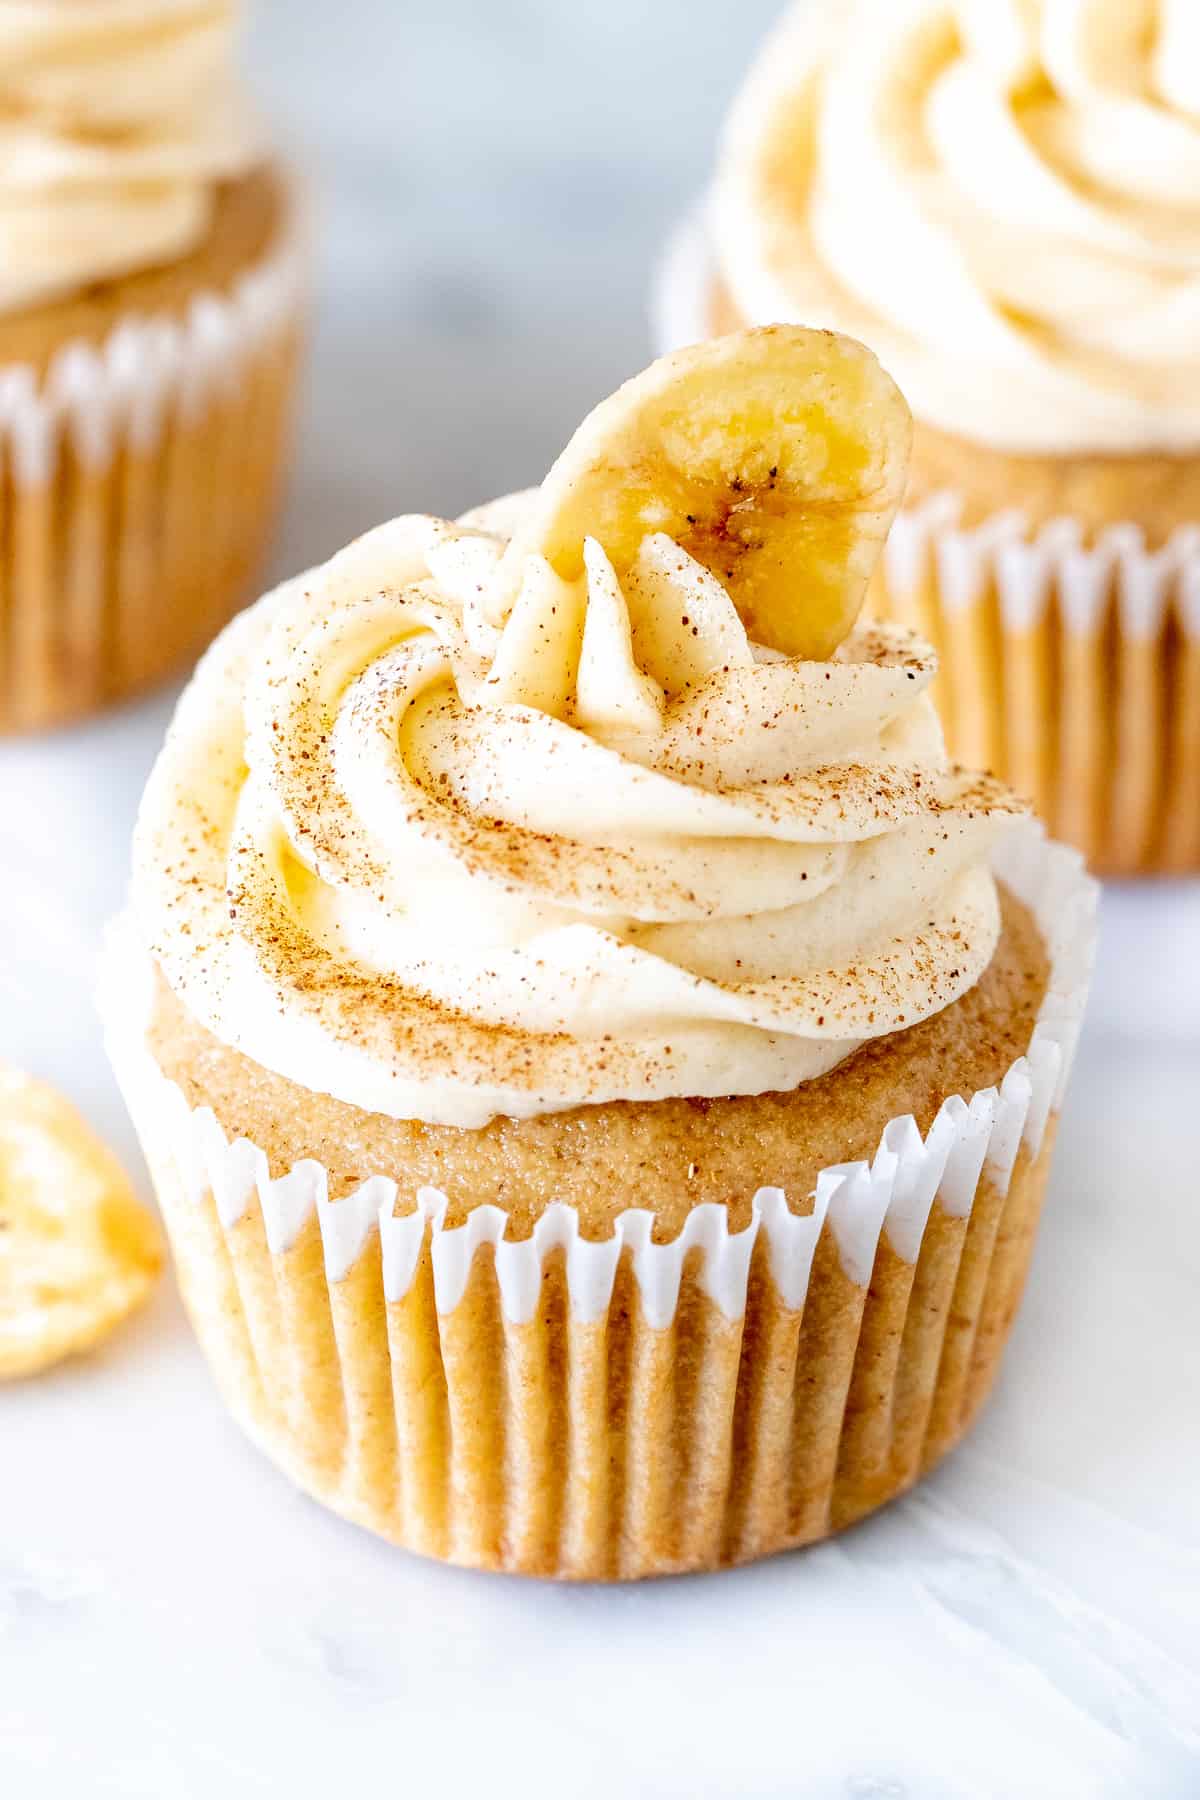 Banana cupcake frosted with cinnamon cream cheese frosting and topped with a banana chip